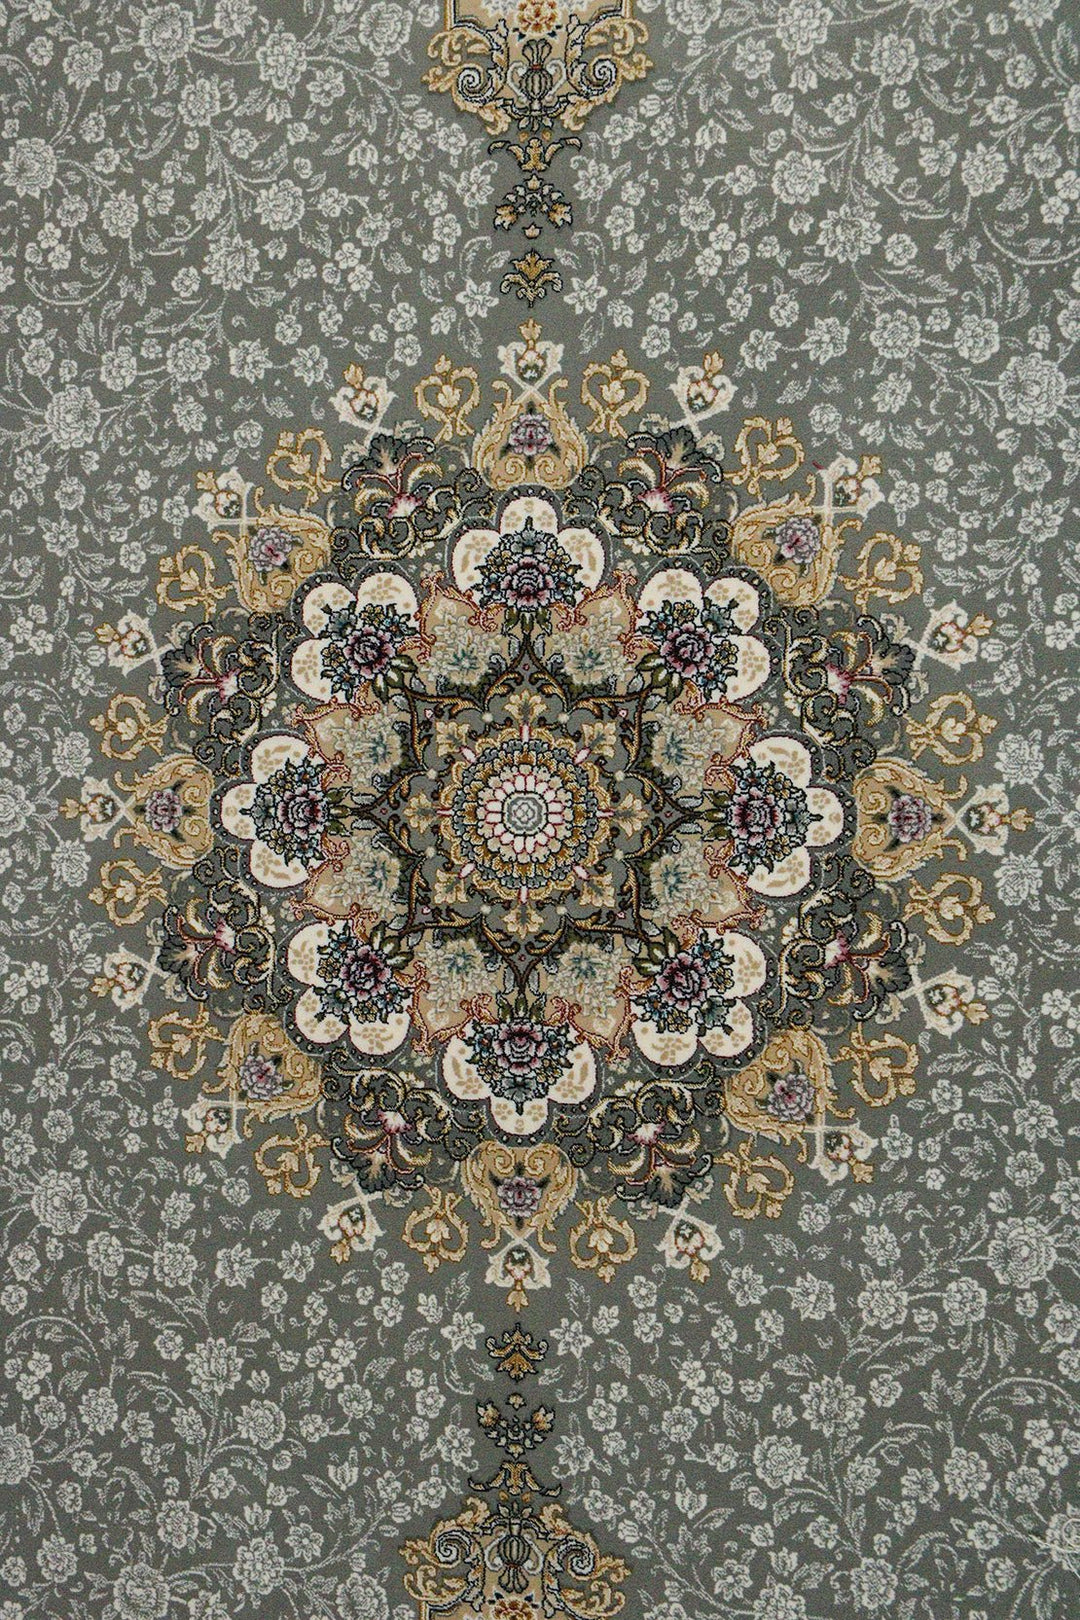 Iranian Premium Quality Moonaco Collection Rug - 4.9 x 7.3 FT - Gray - Resilient Construction for Long-Lasting Use - V Surfaces